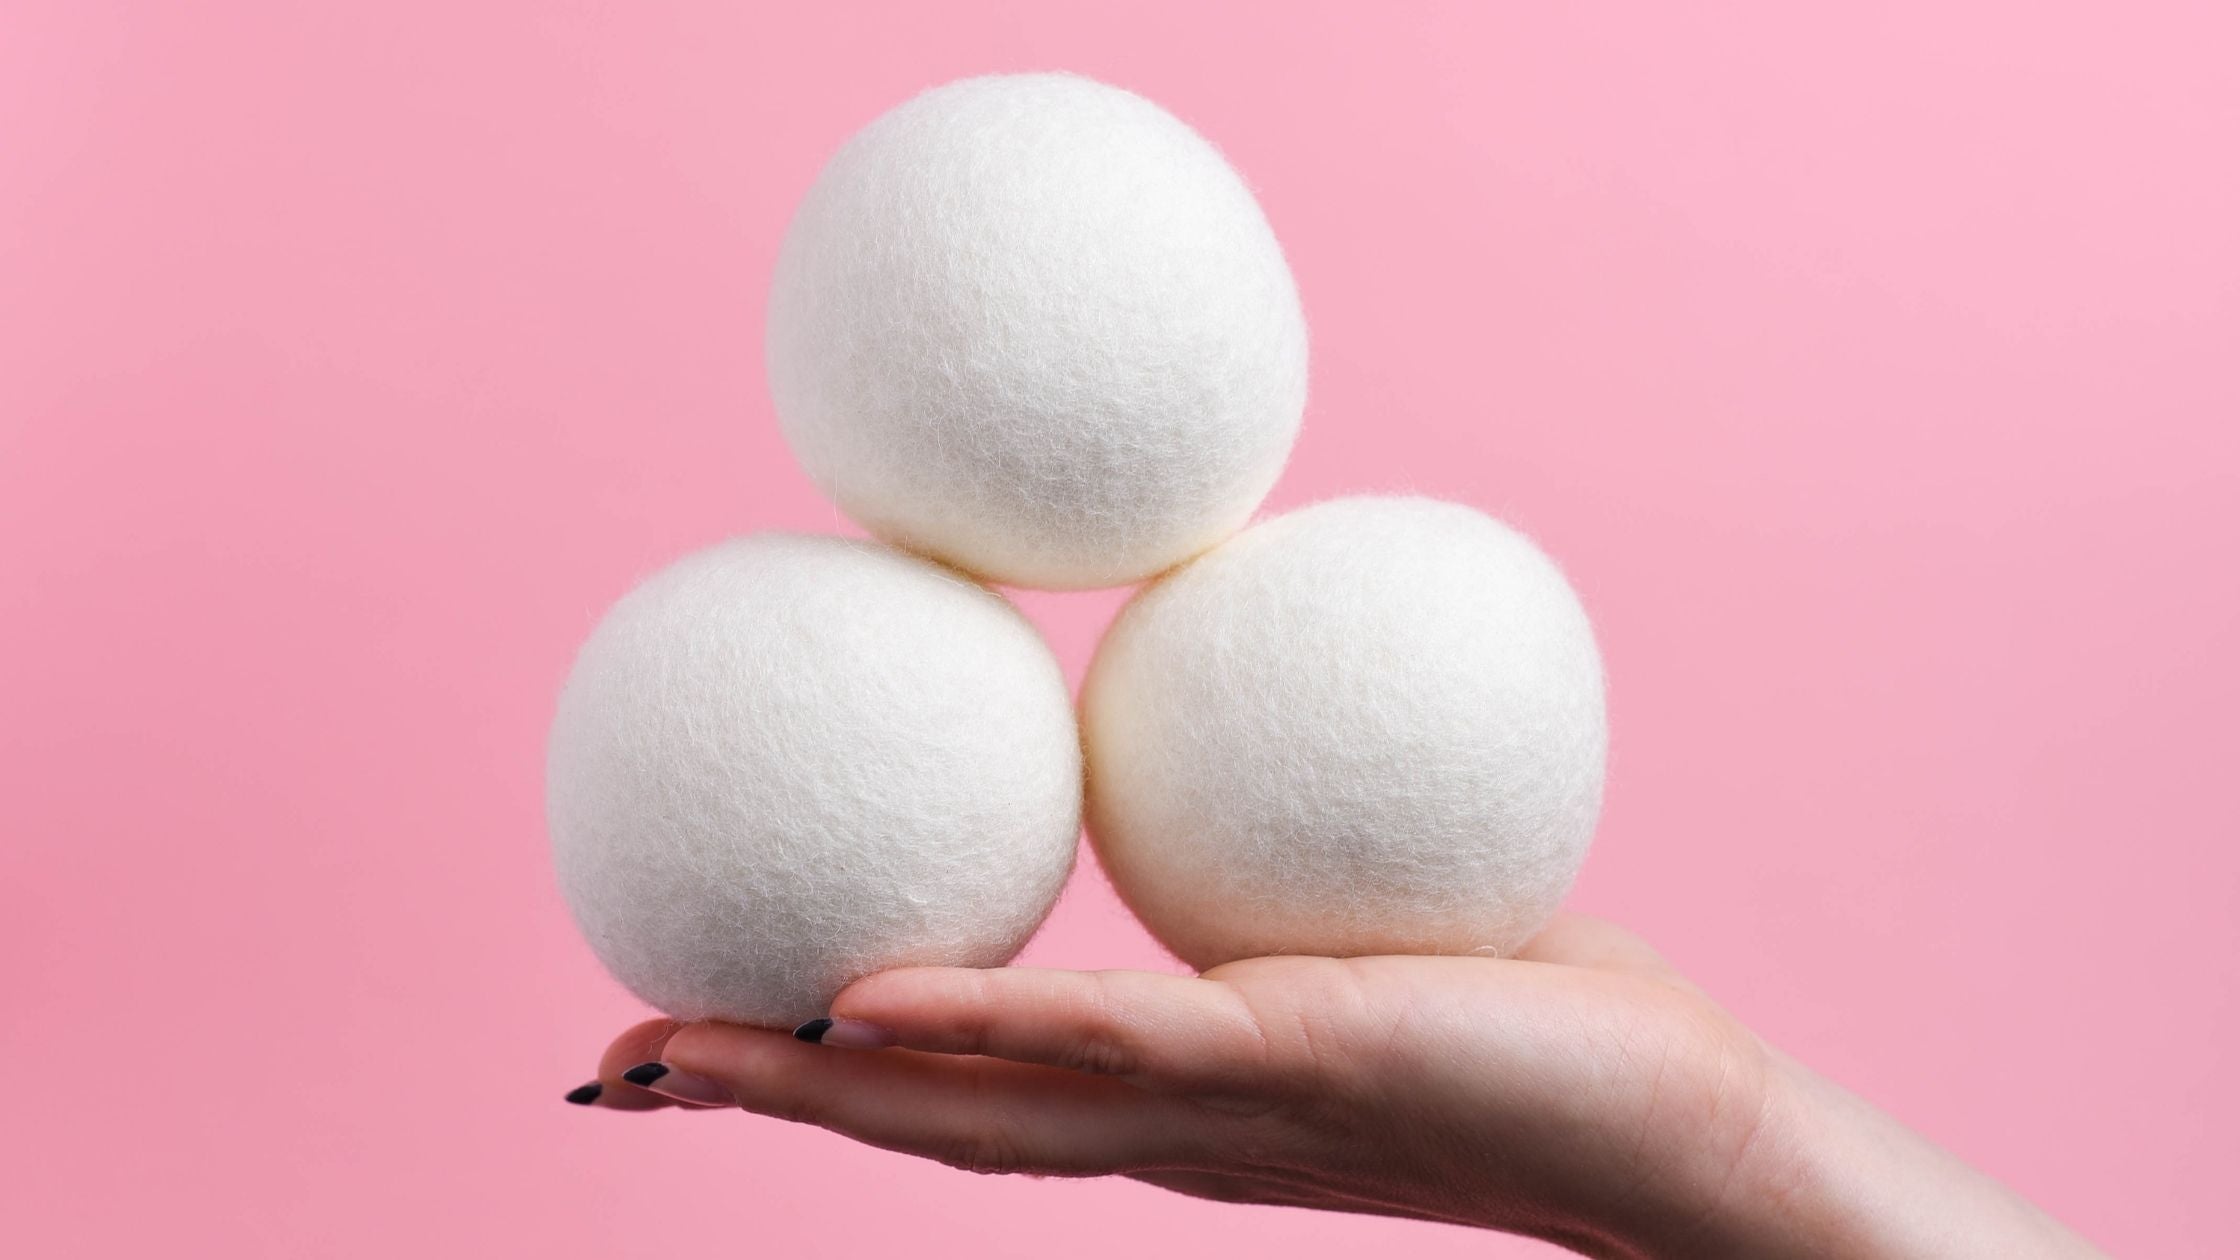 Do Wool Dryer Balls Work? Absolutely, and Here's How! – Sonoma Wool Company